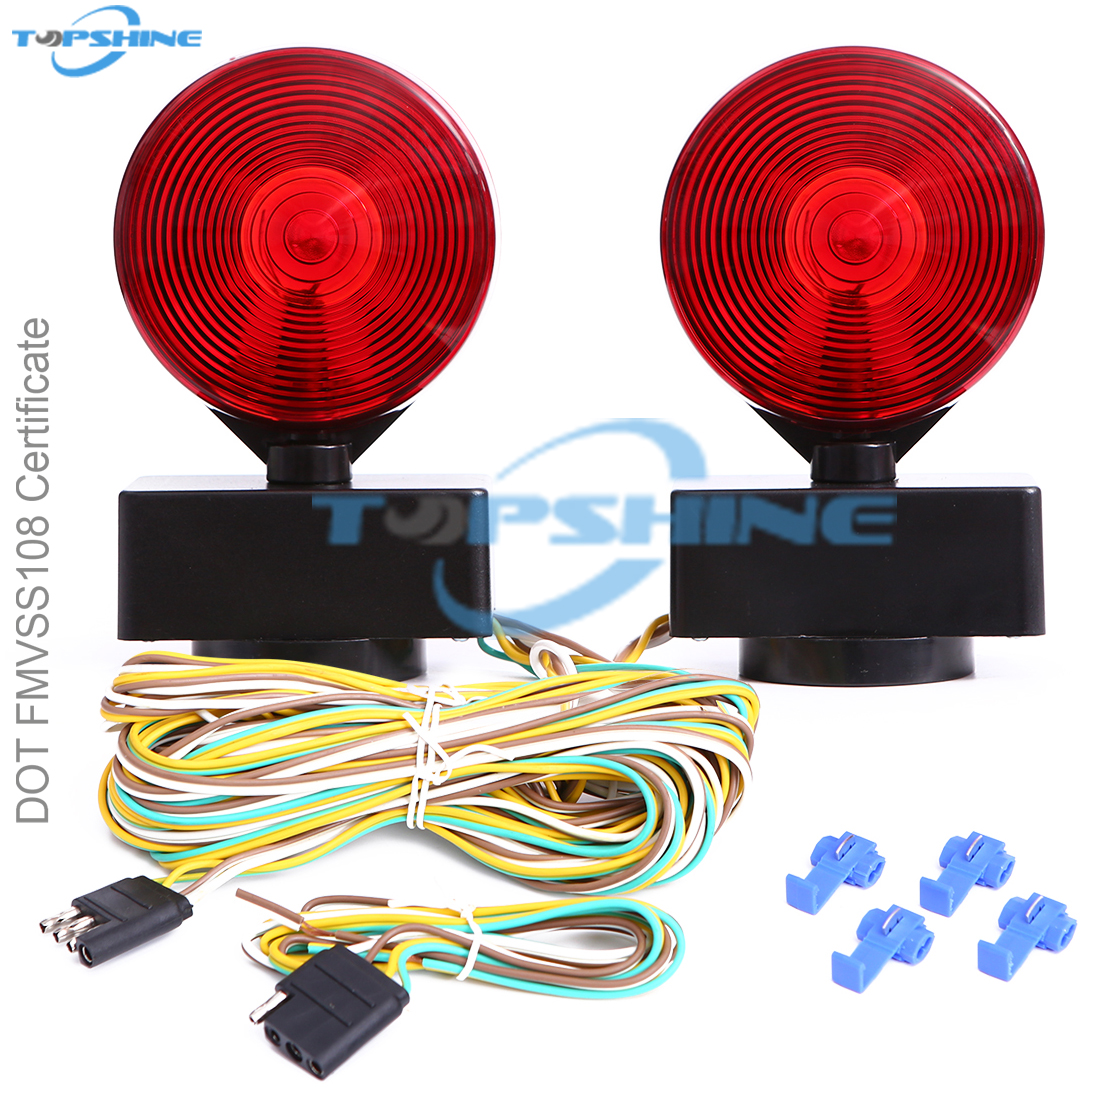 101506 Trailer Light Magnetic Towing Light Kit Featured Image